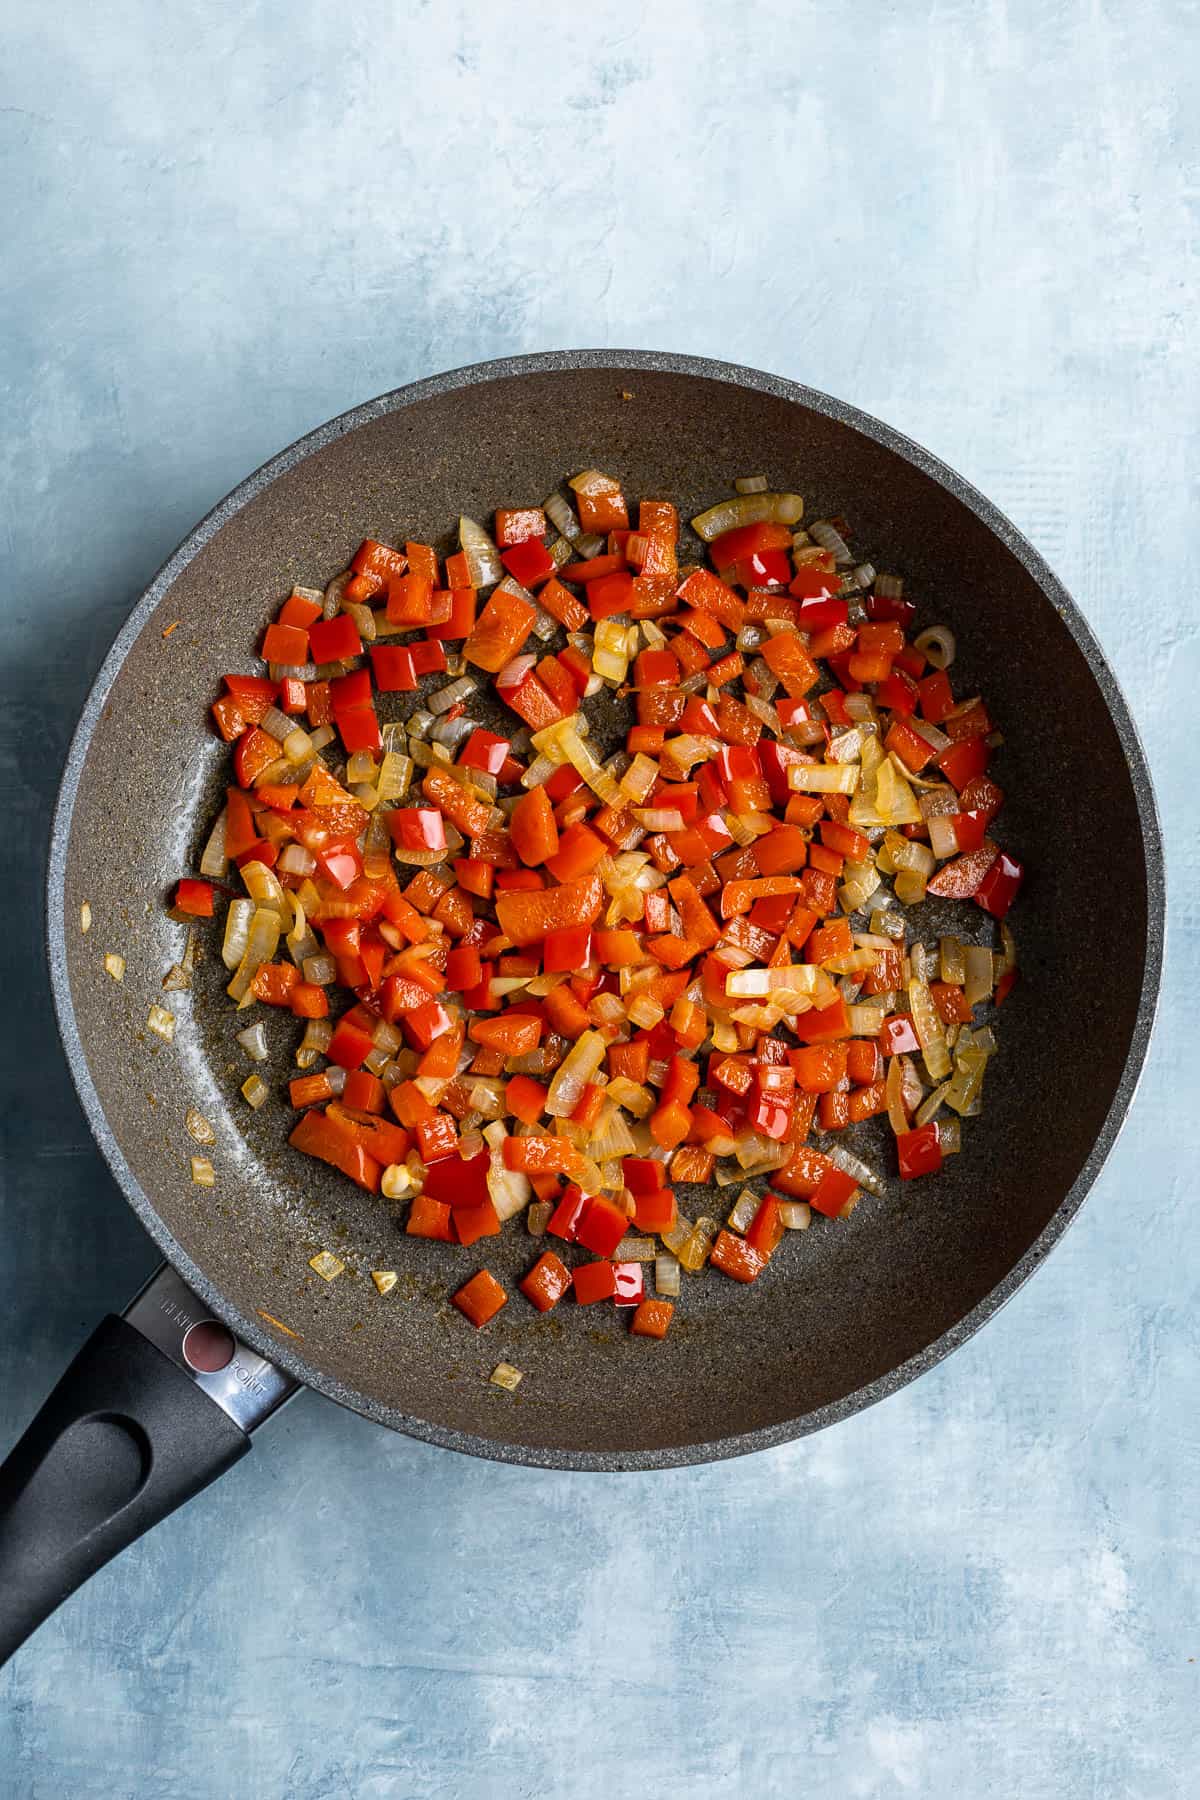 Sautéed onion and pepper in a skillet.